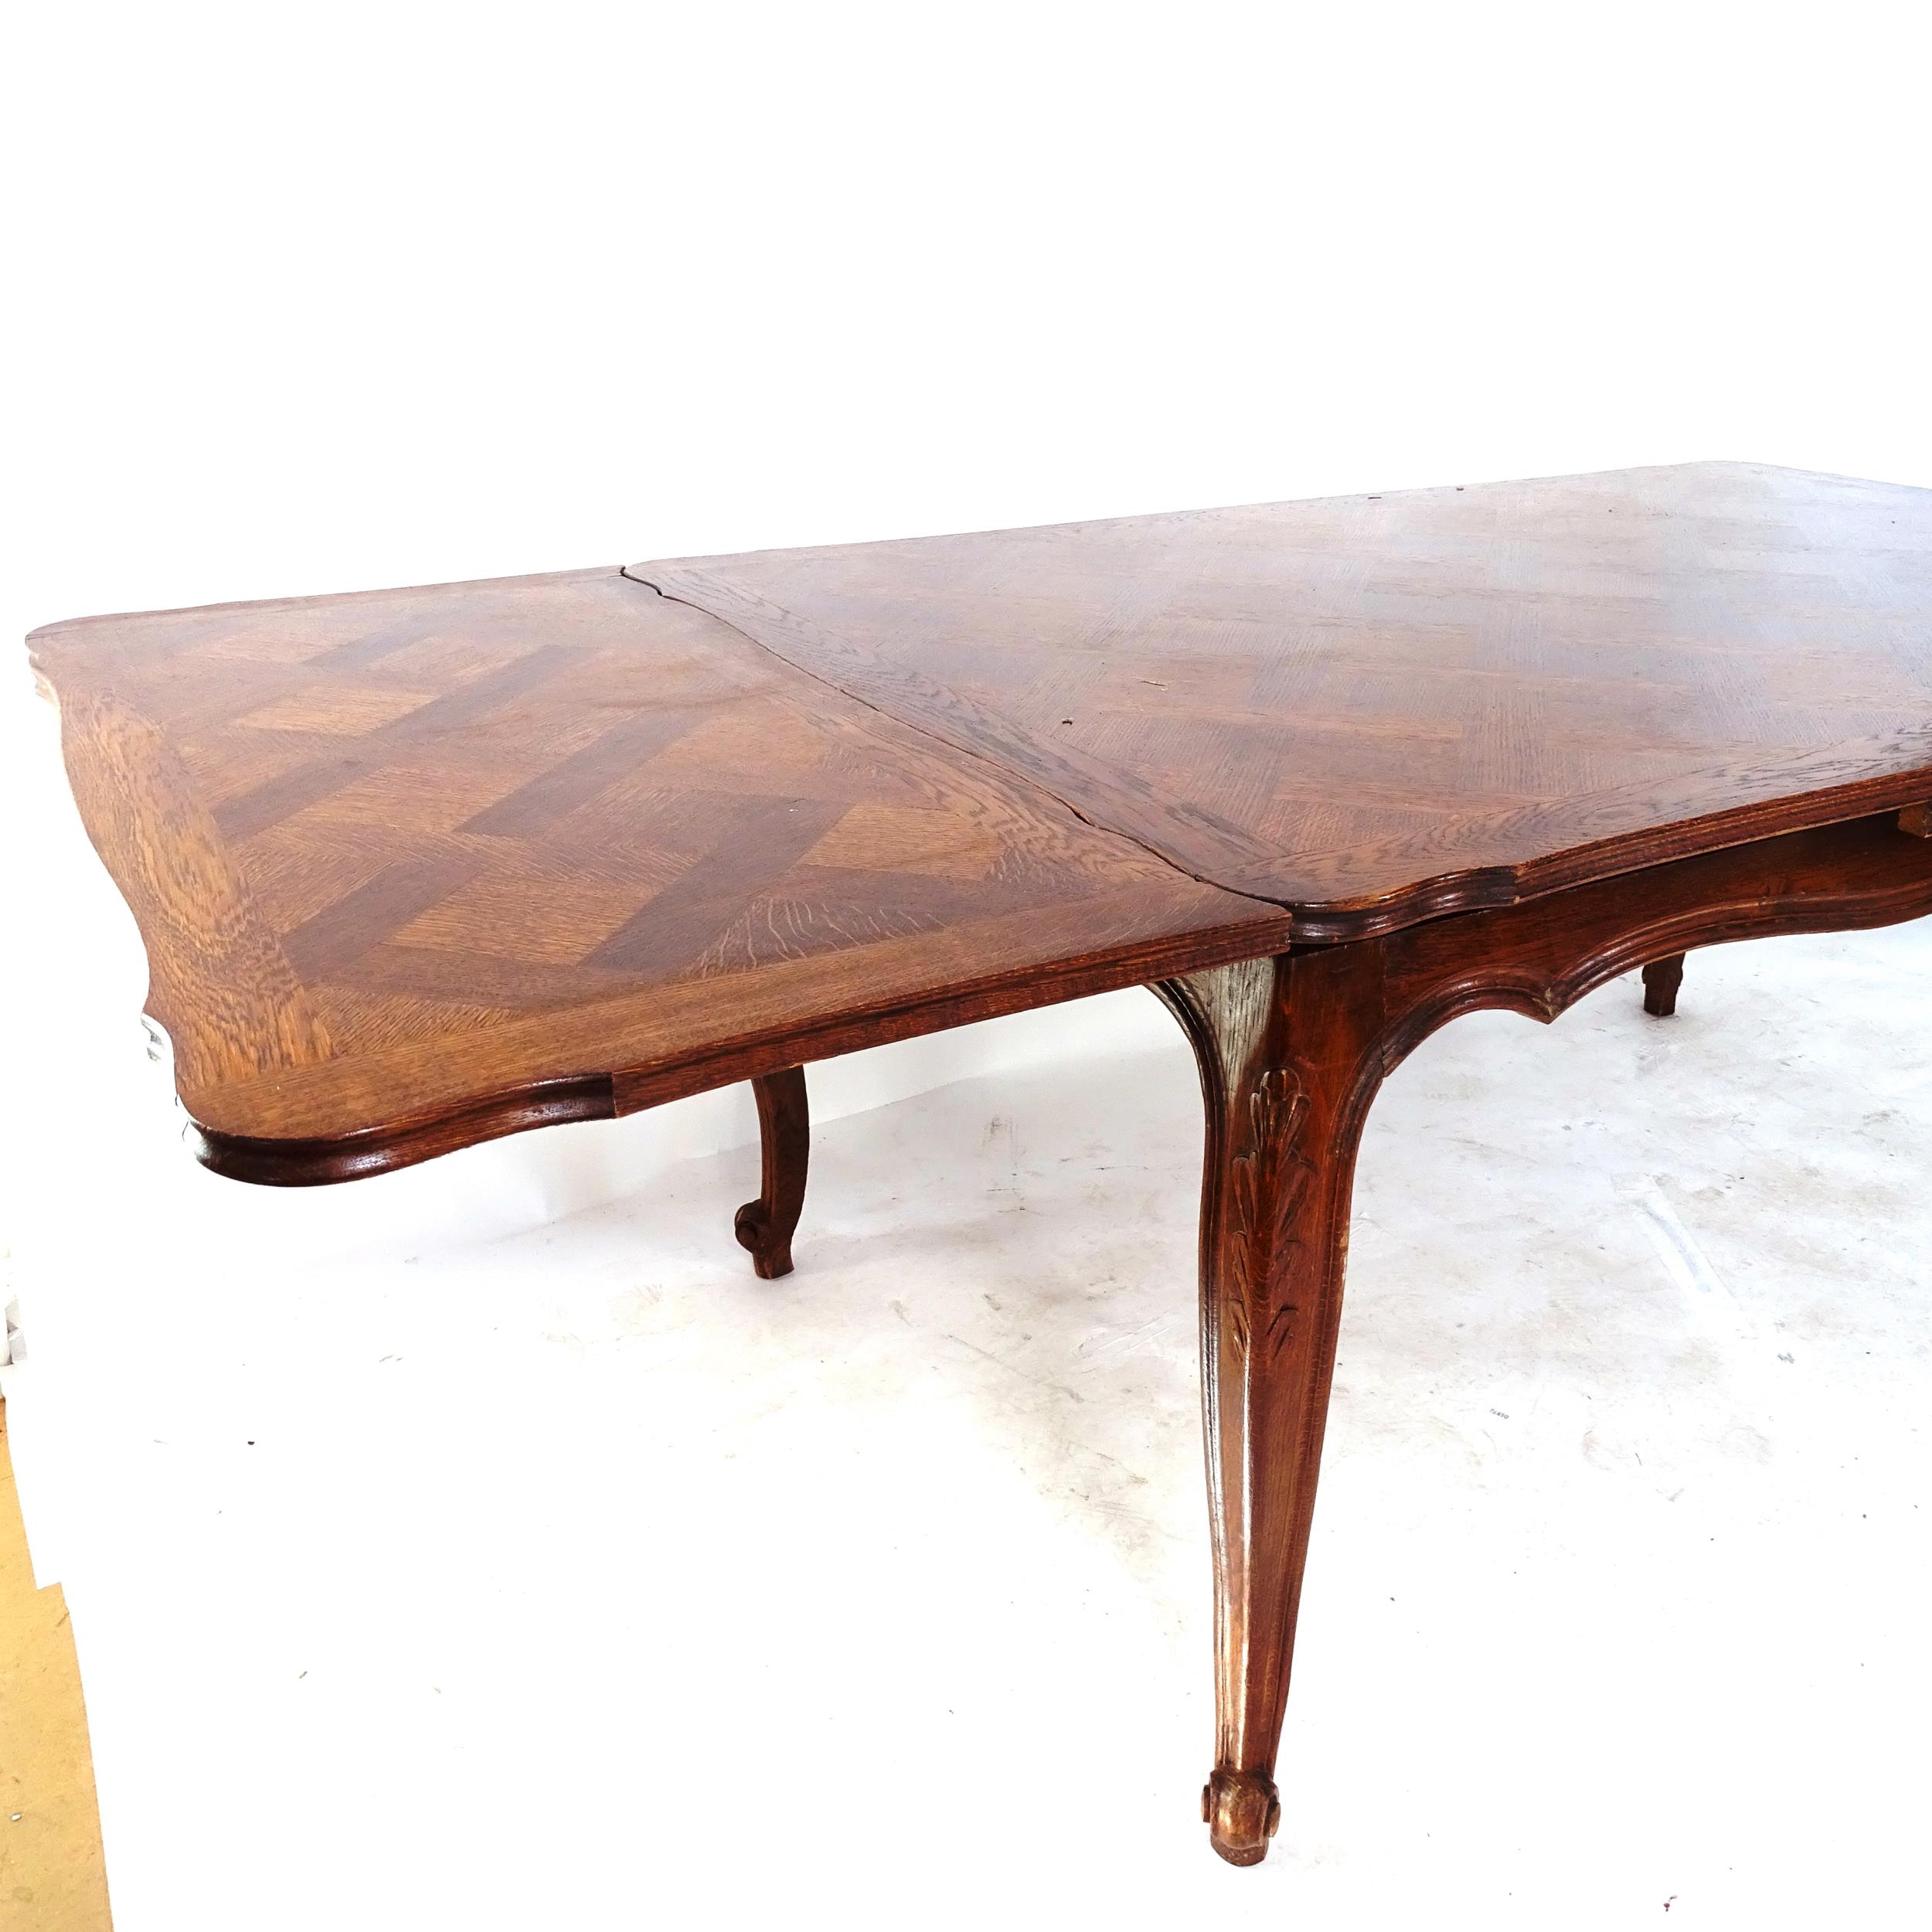 A large French oak parquetry-topped draw leaf dining table, on cabriole legs, L150cm extending to - Bild 2 aus 2